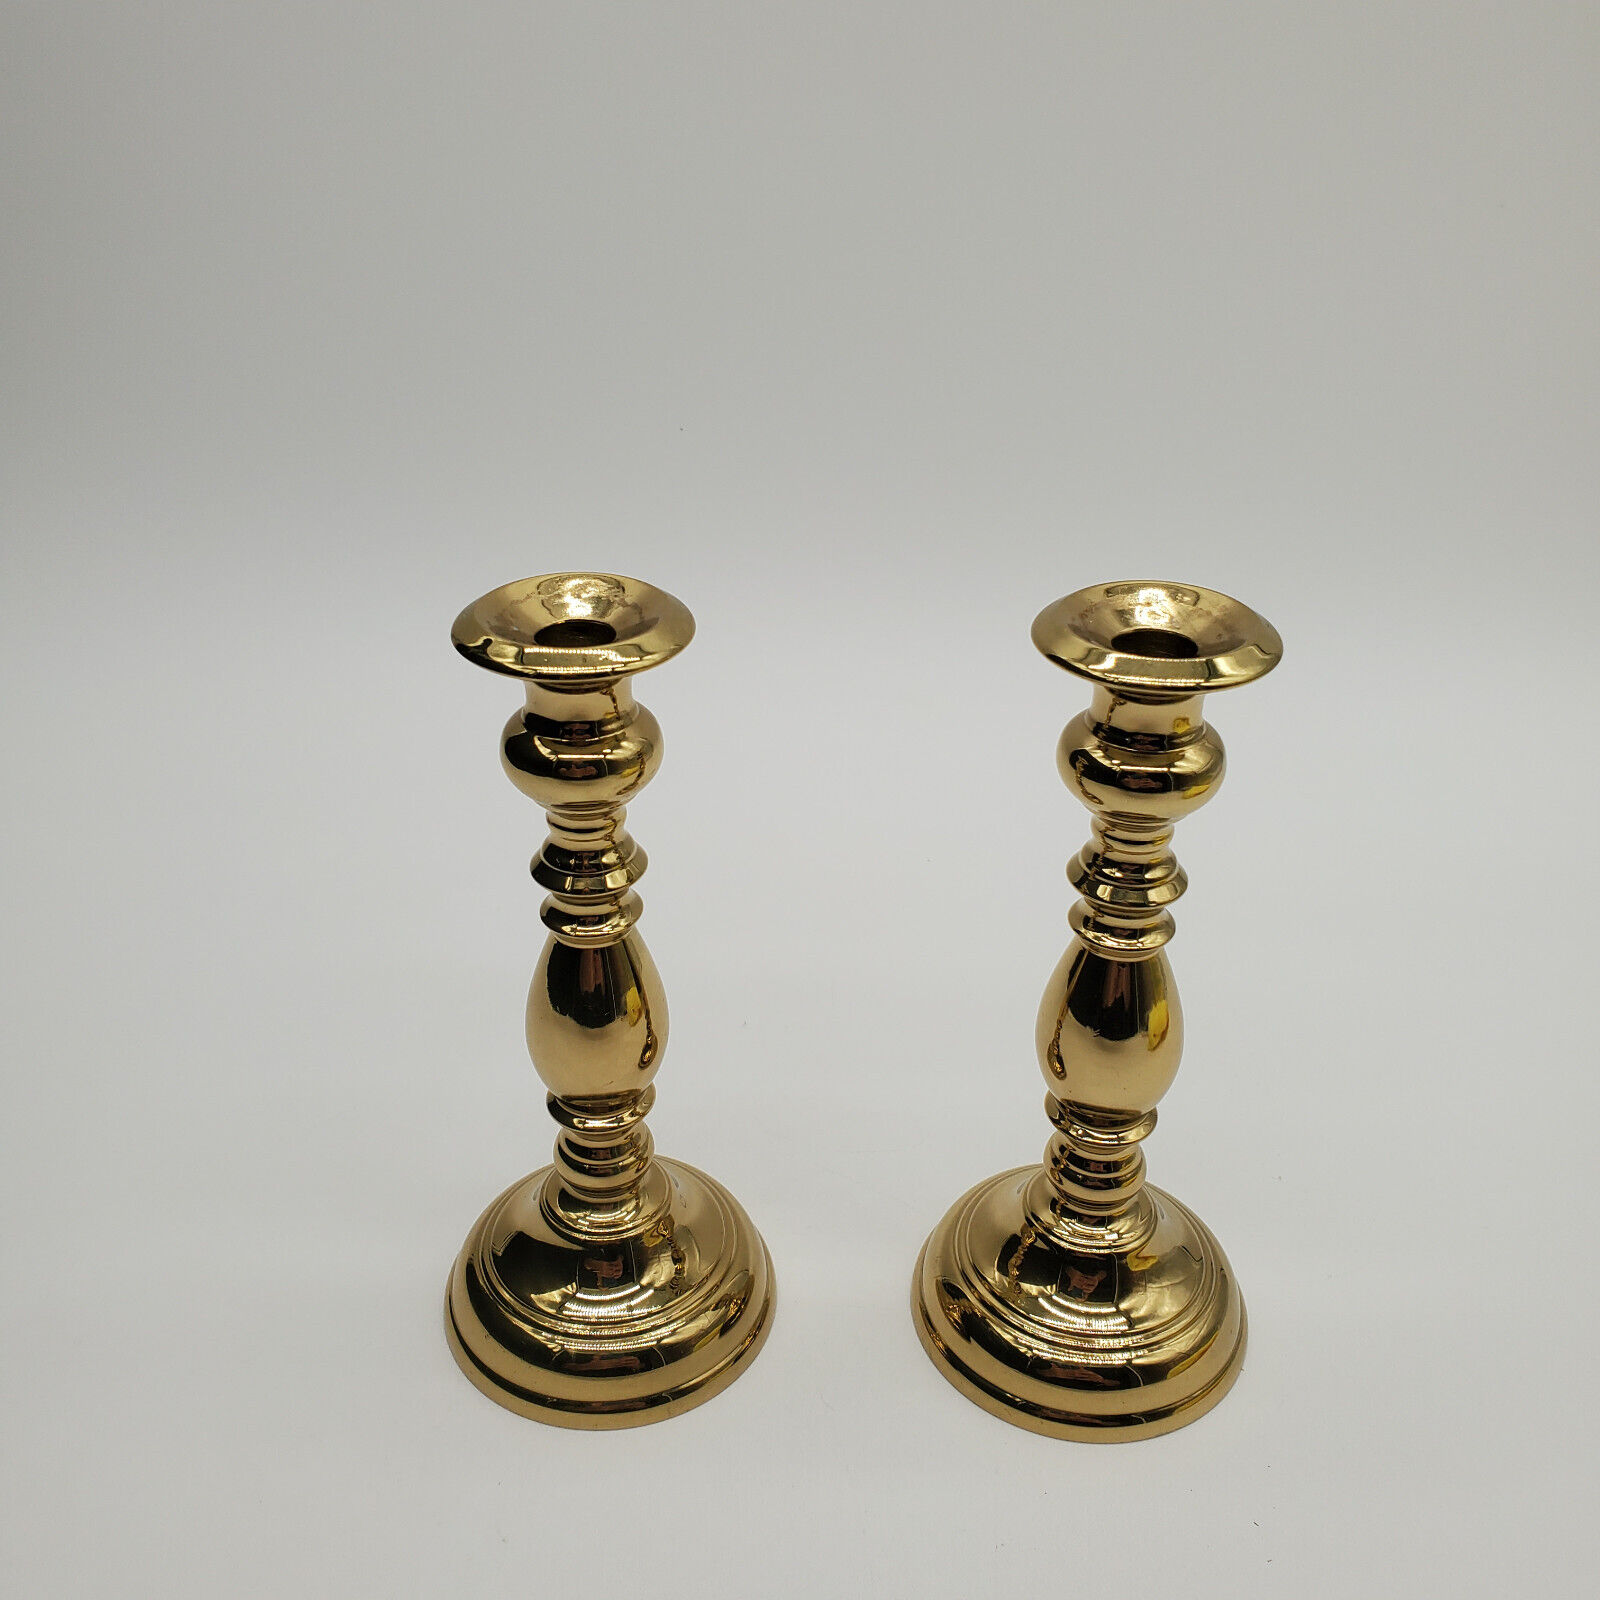 Pair of Virginia Metalcrafters Brass Candlestick Holders #3014